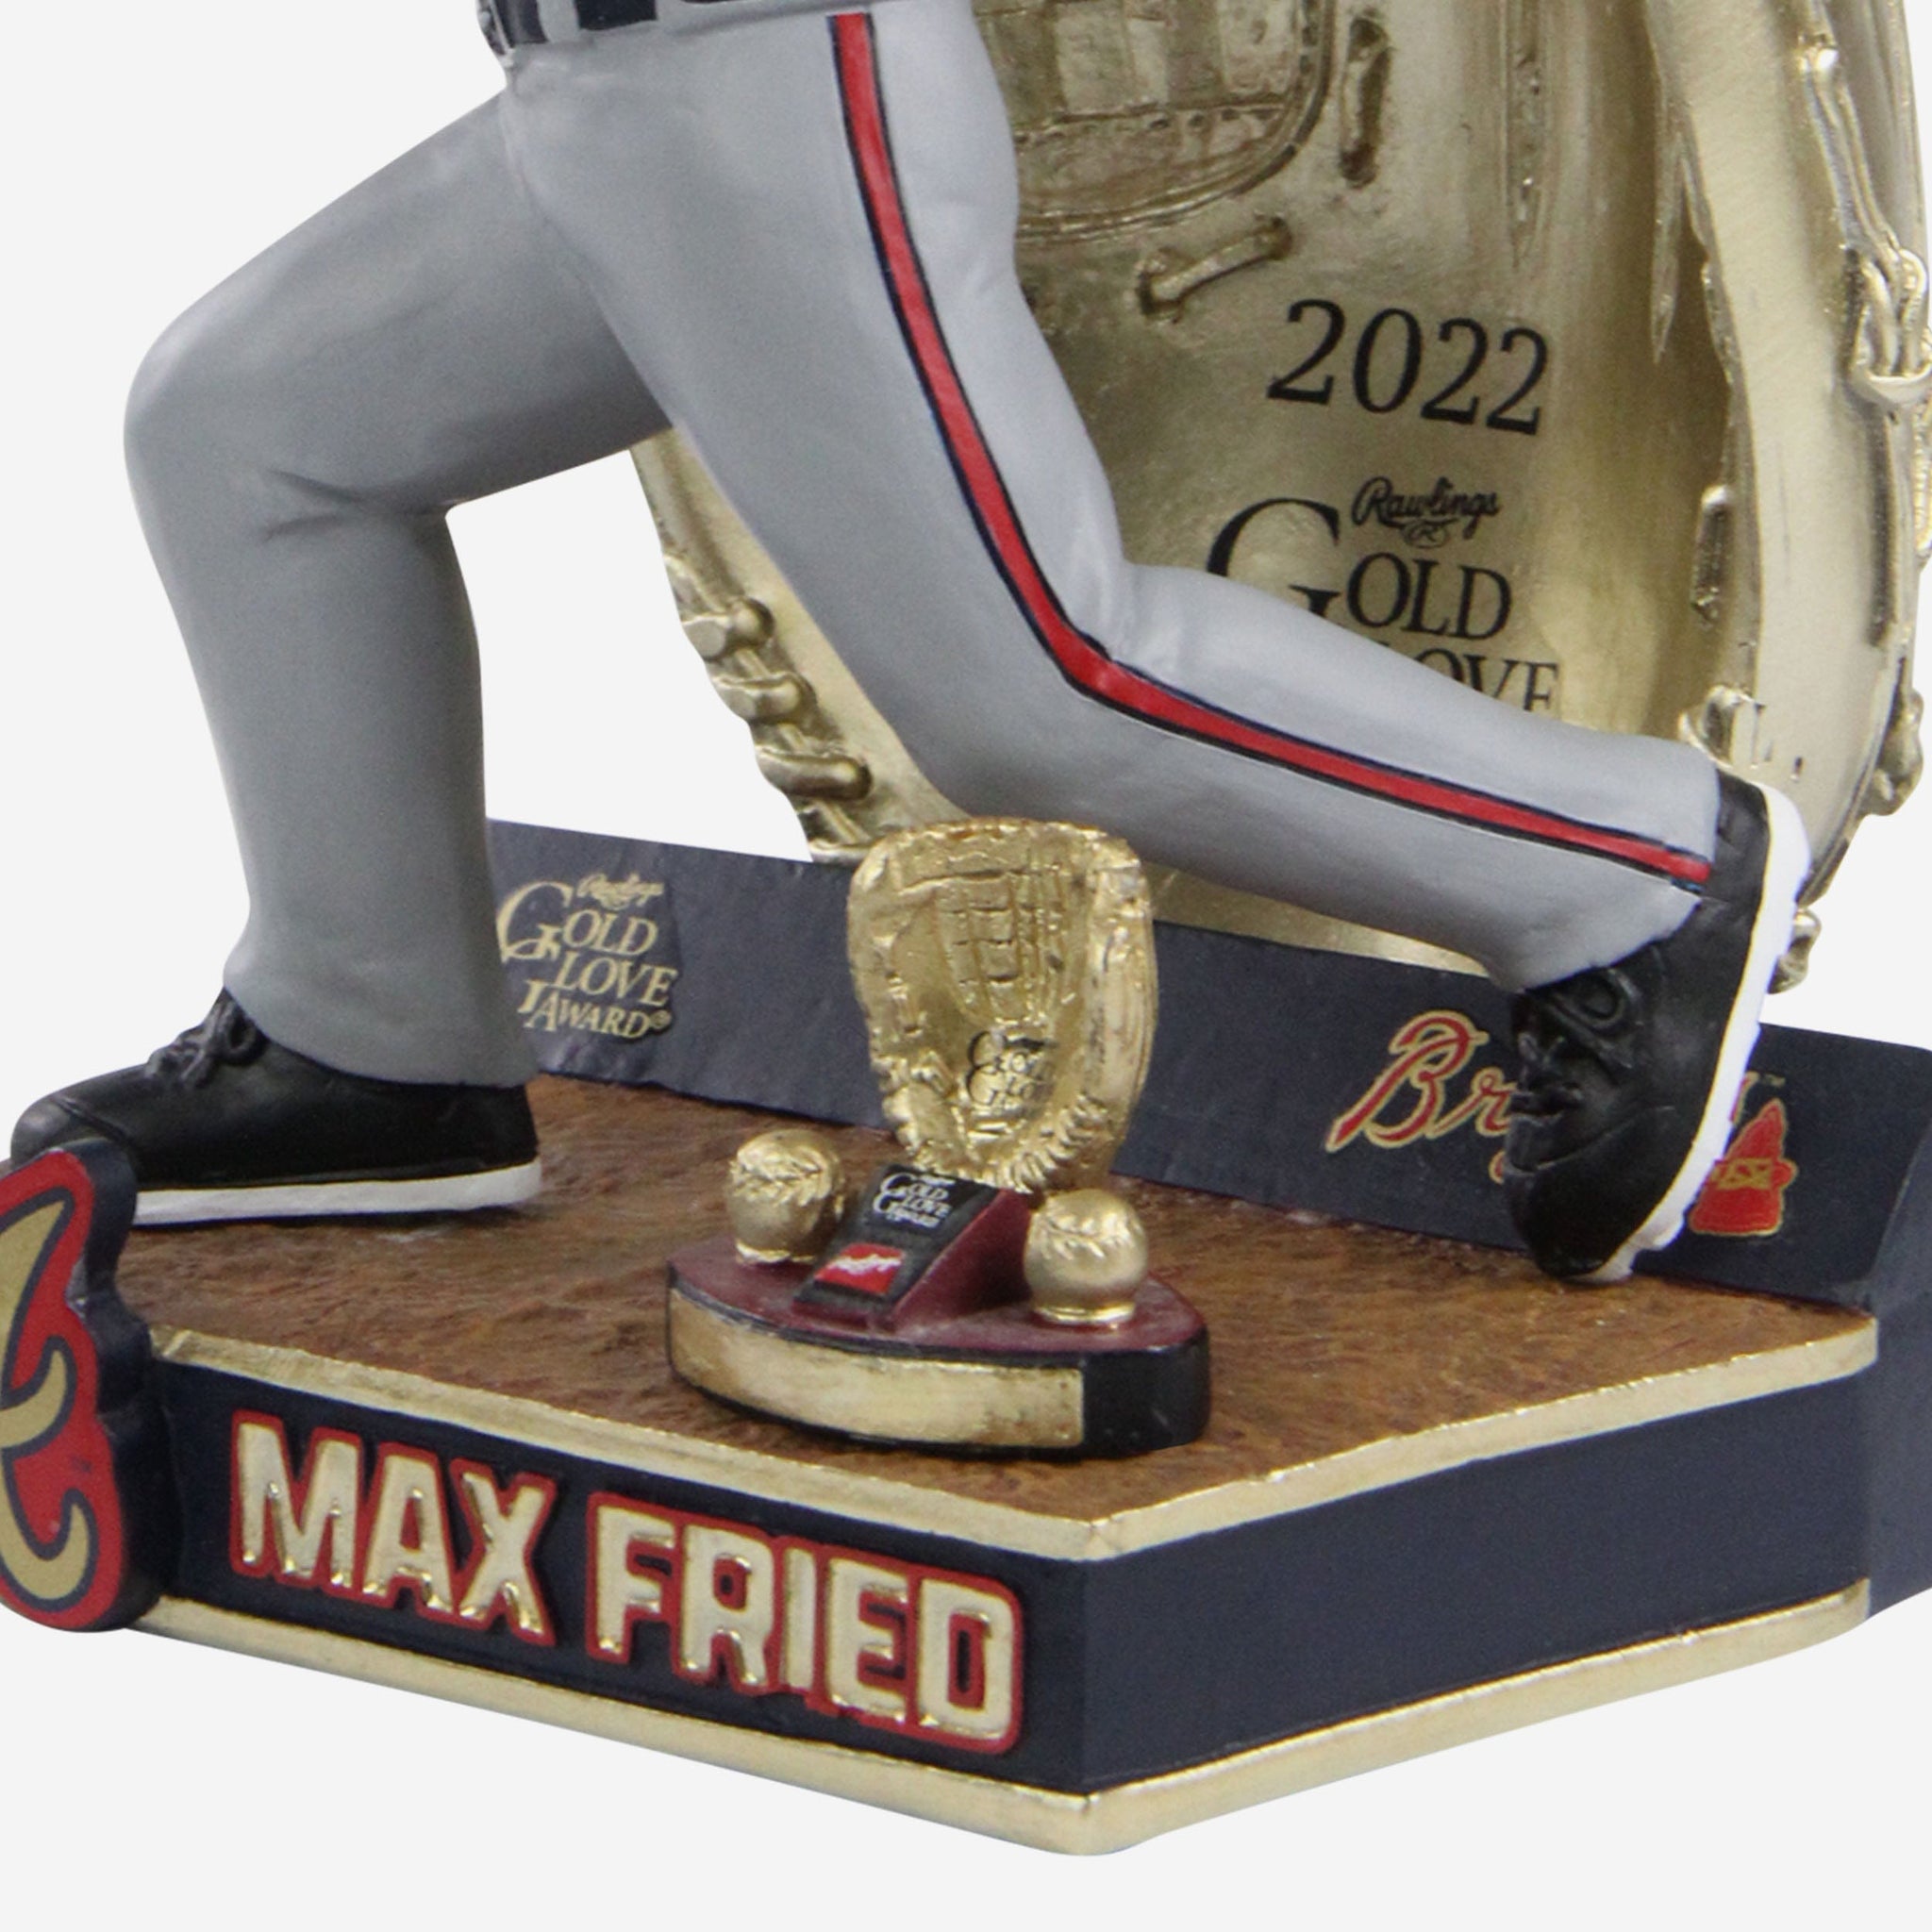 Max Fried of the Atlanta Braves accepts the Golden Glove award